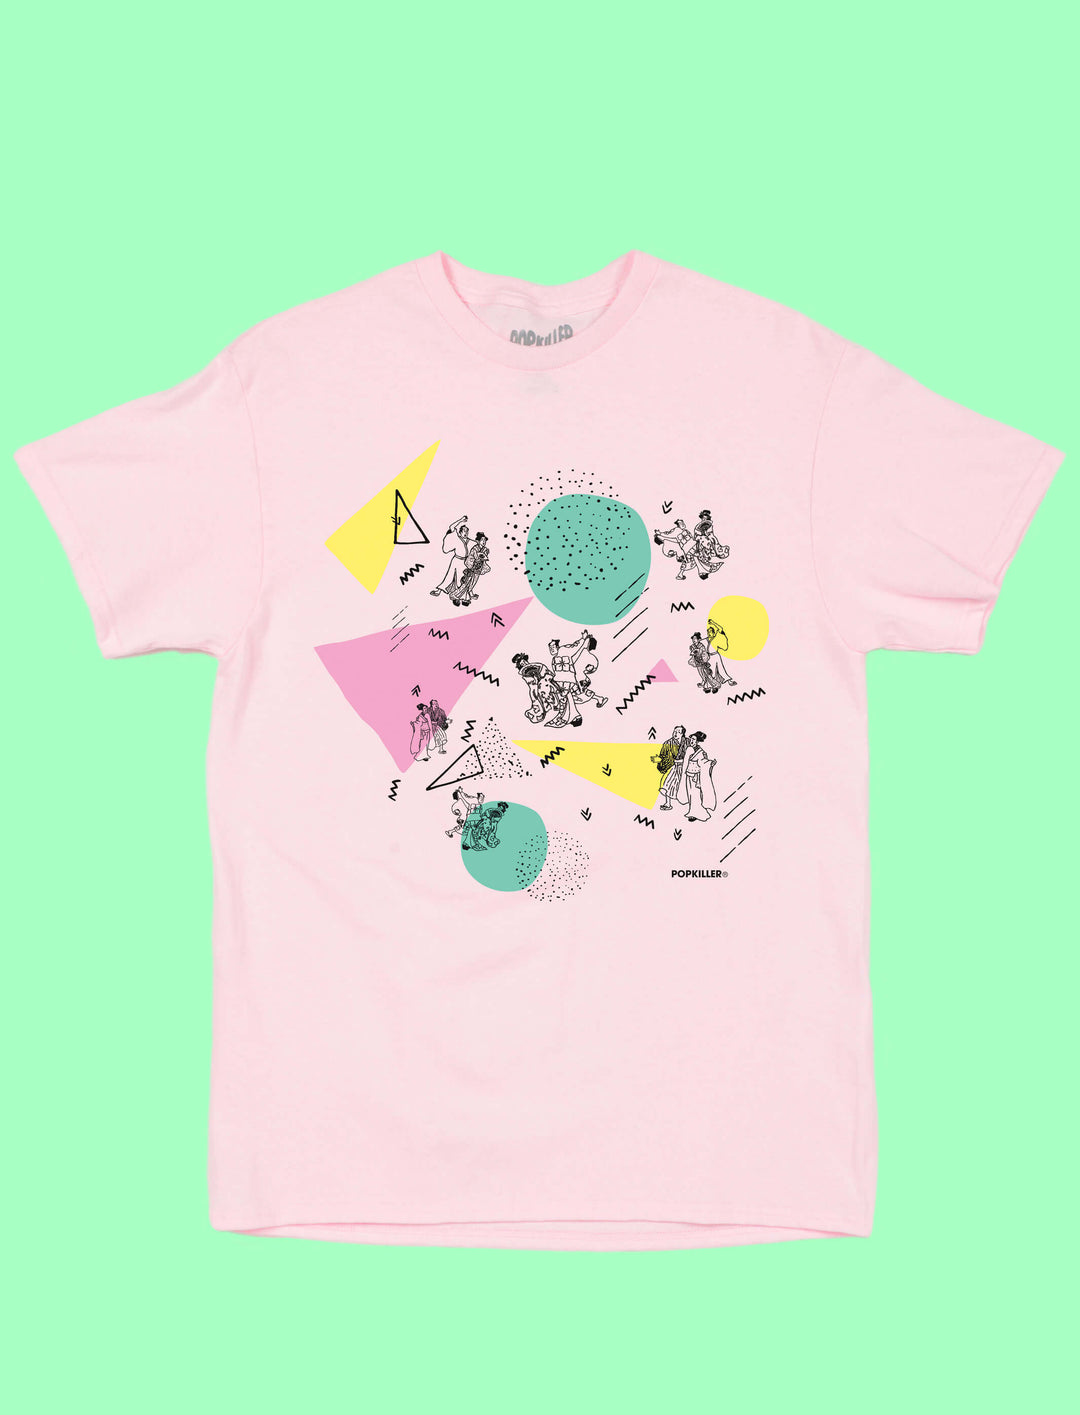 Pink Japanese Memphis style graphic t-shirt..